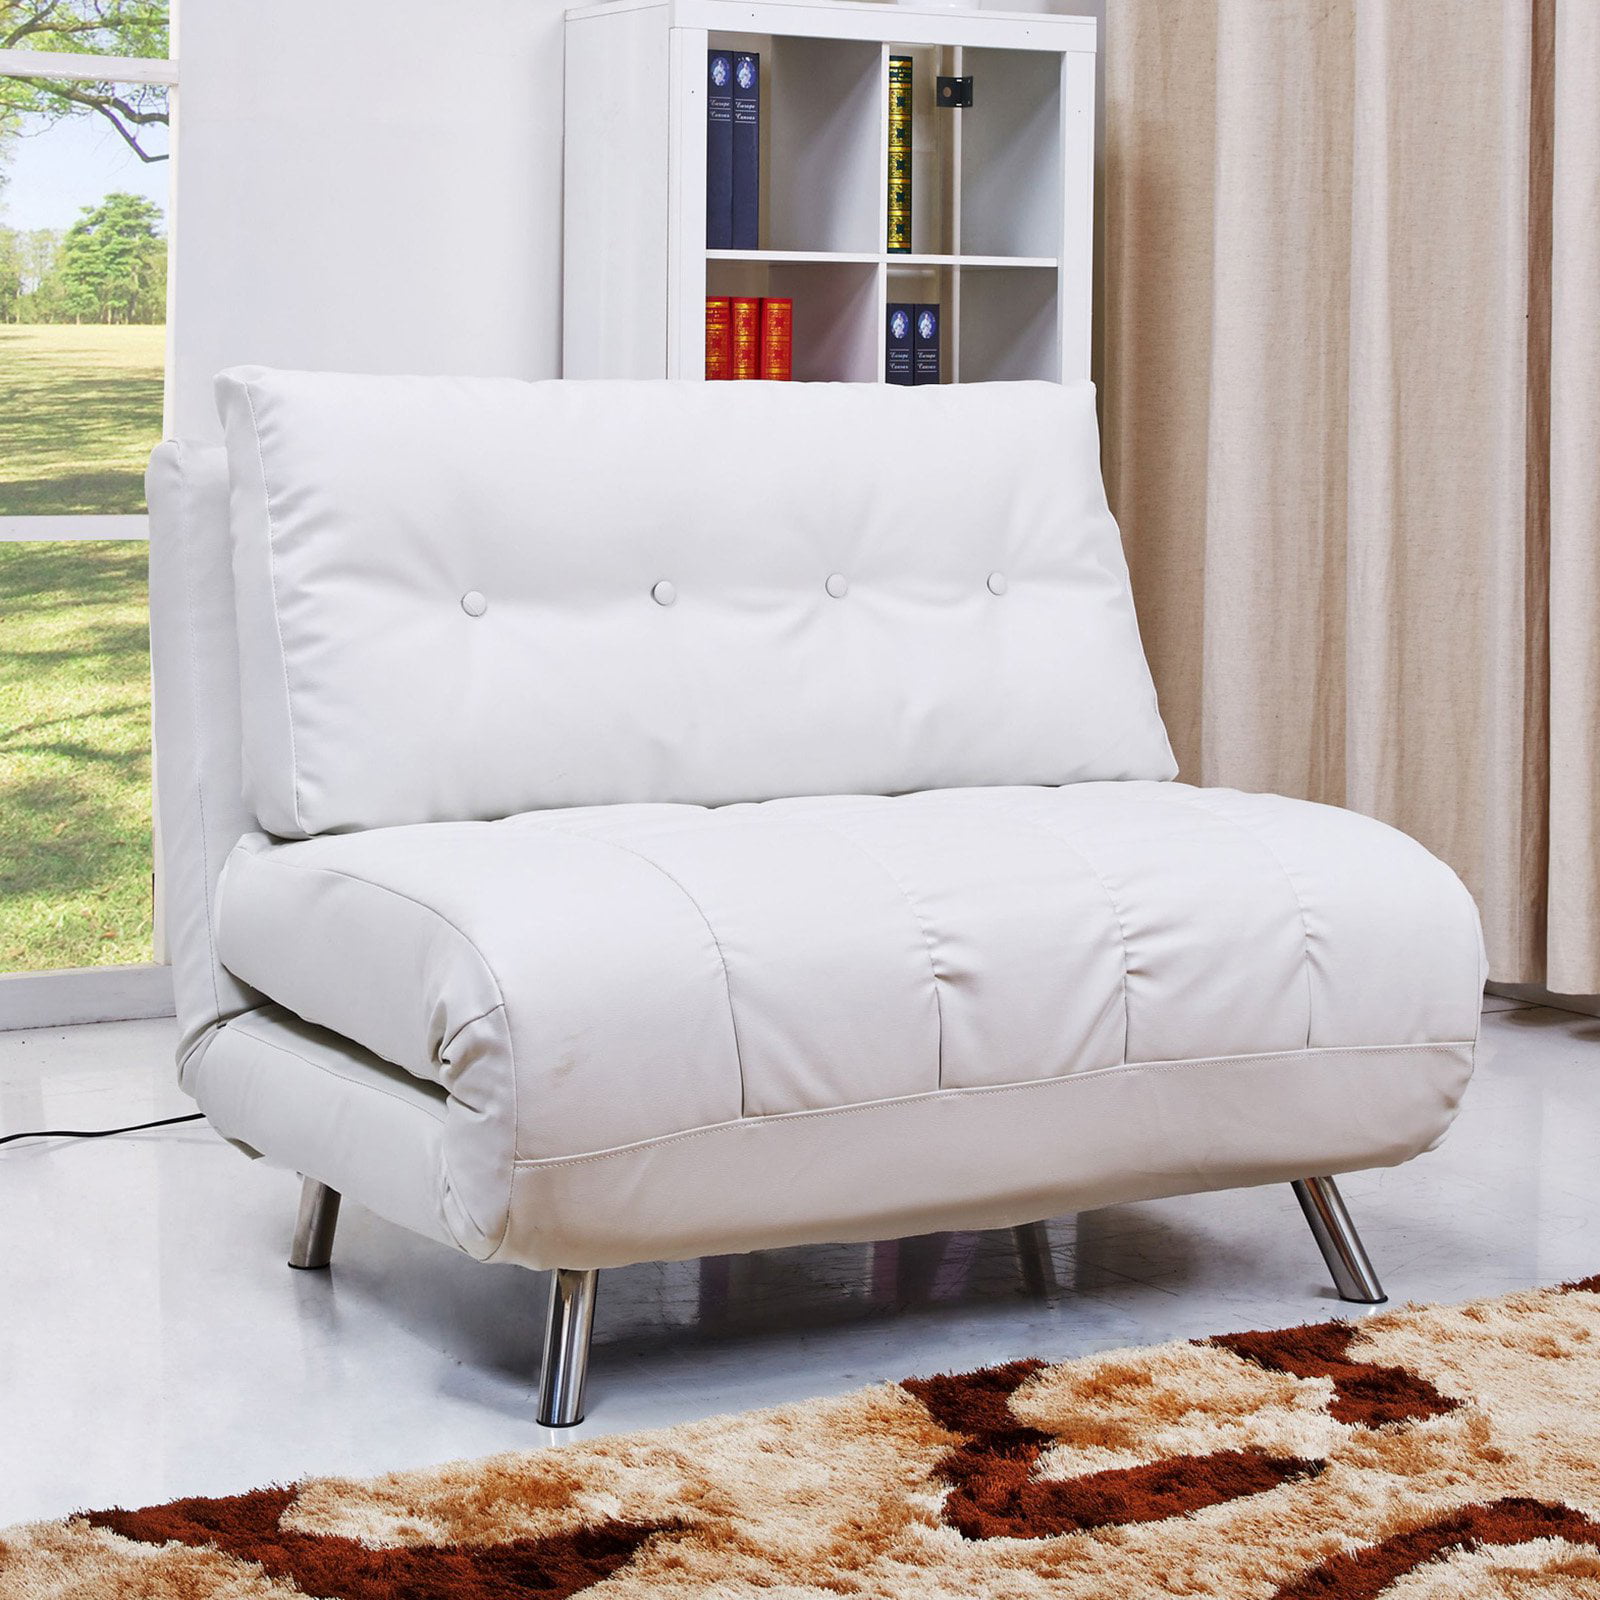 Creatice Sofa Chair Bed Convertible for Small Space